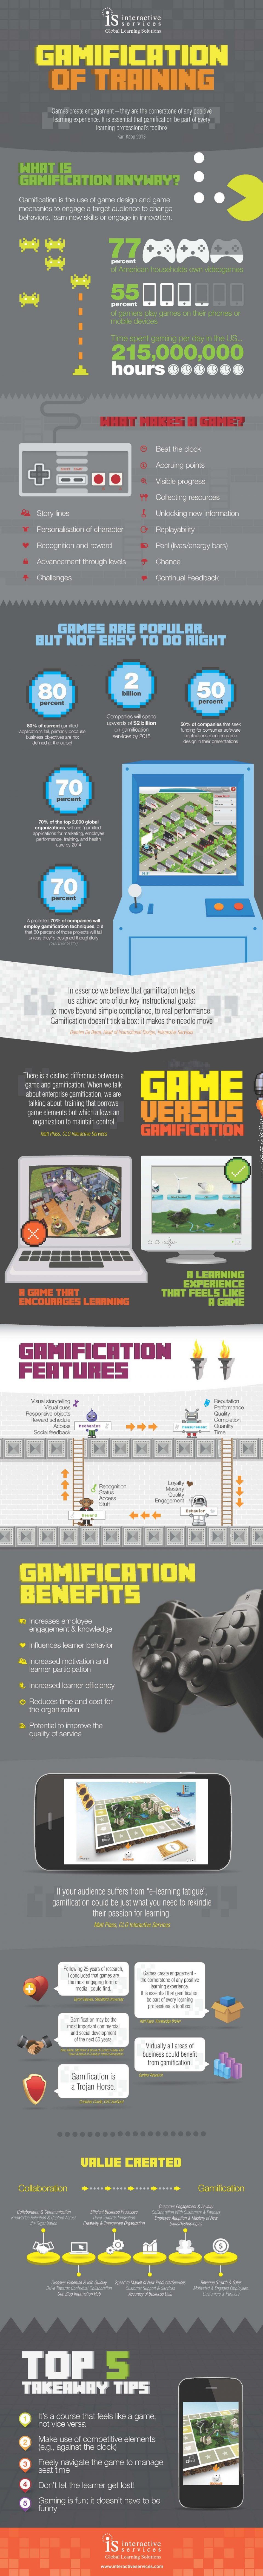 Gamification of Training Infographic